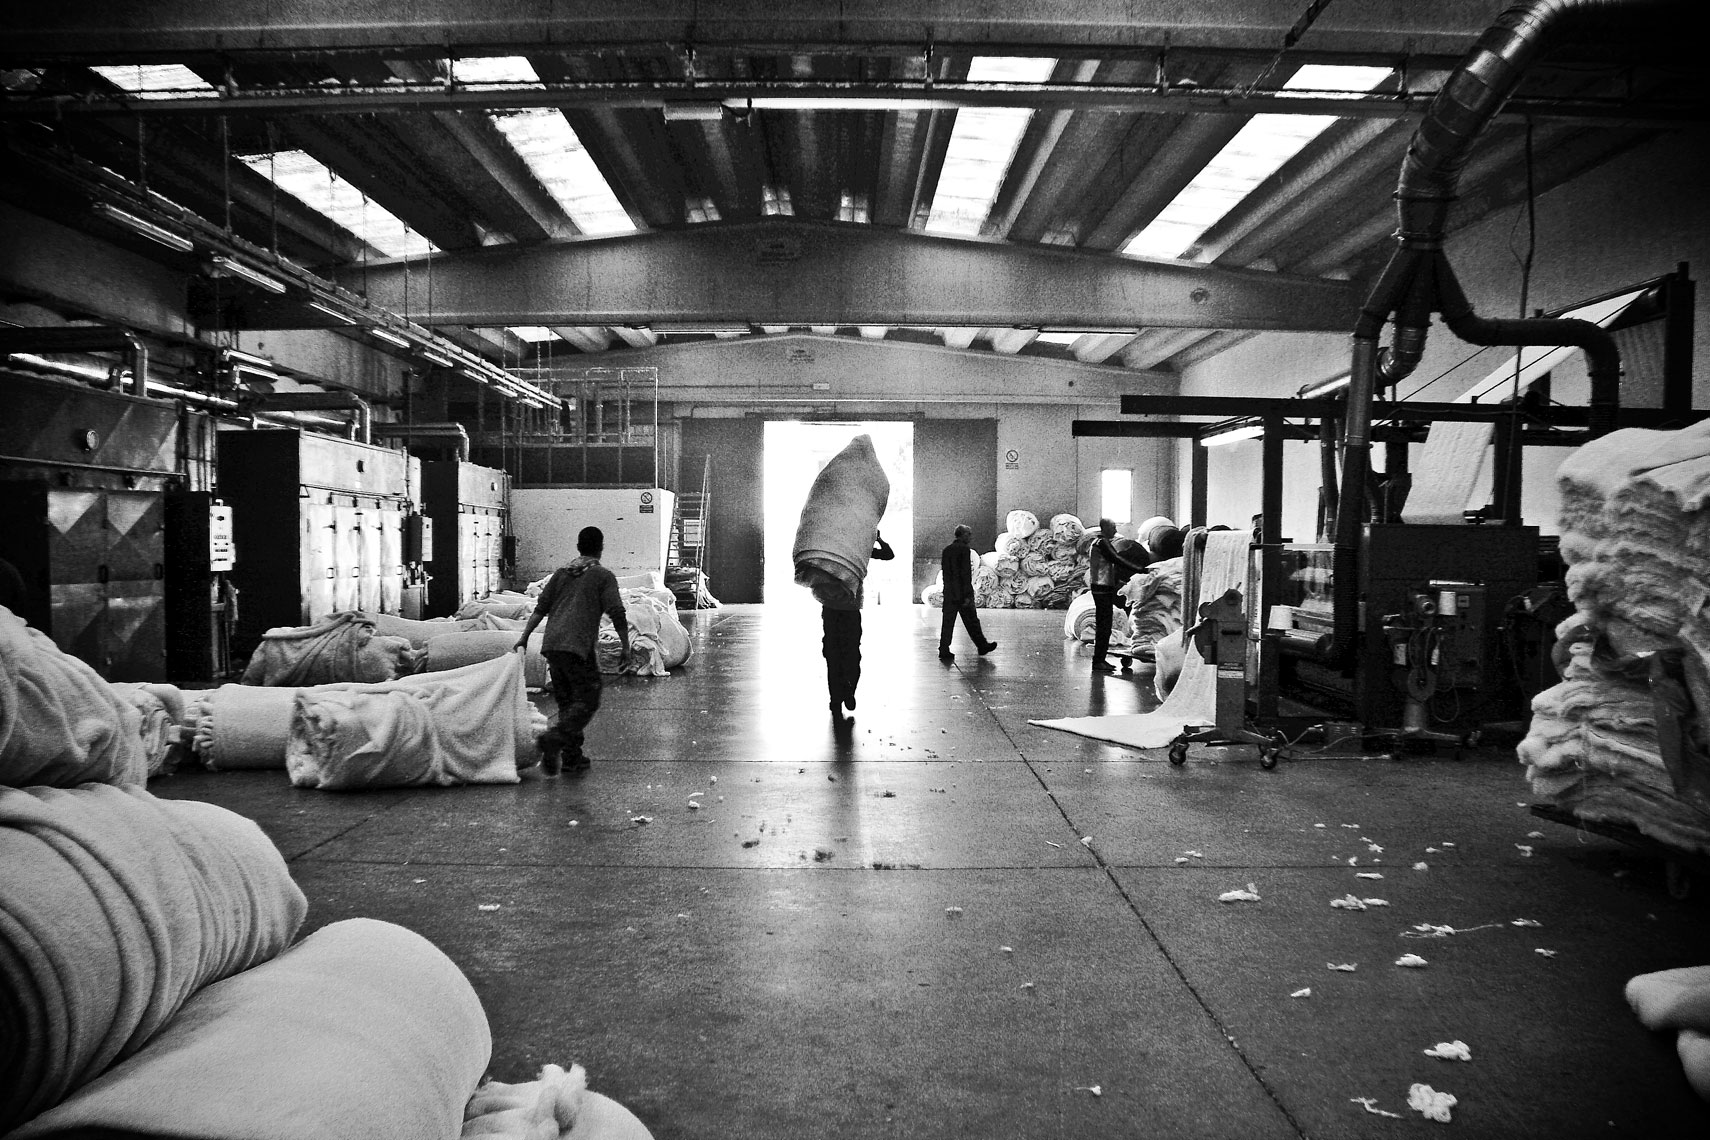 ITALY. Poggio a Caiano (Prato), 1st April 2009. Workers takes out wool shreds from washing machines.